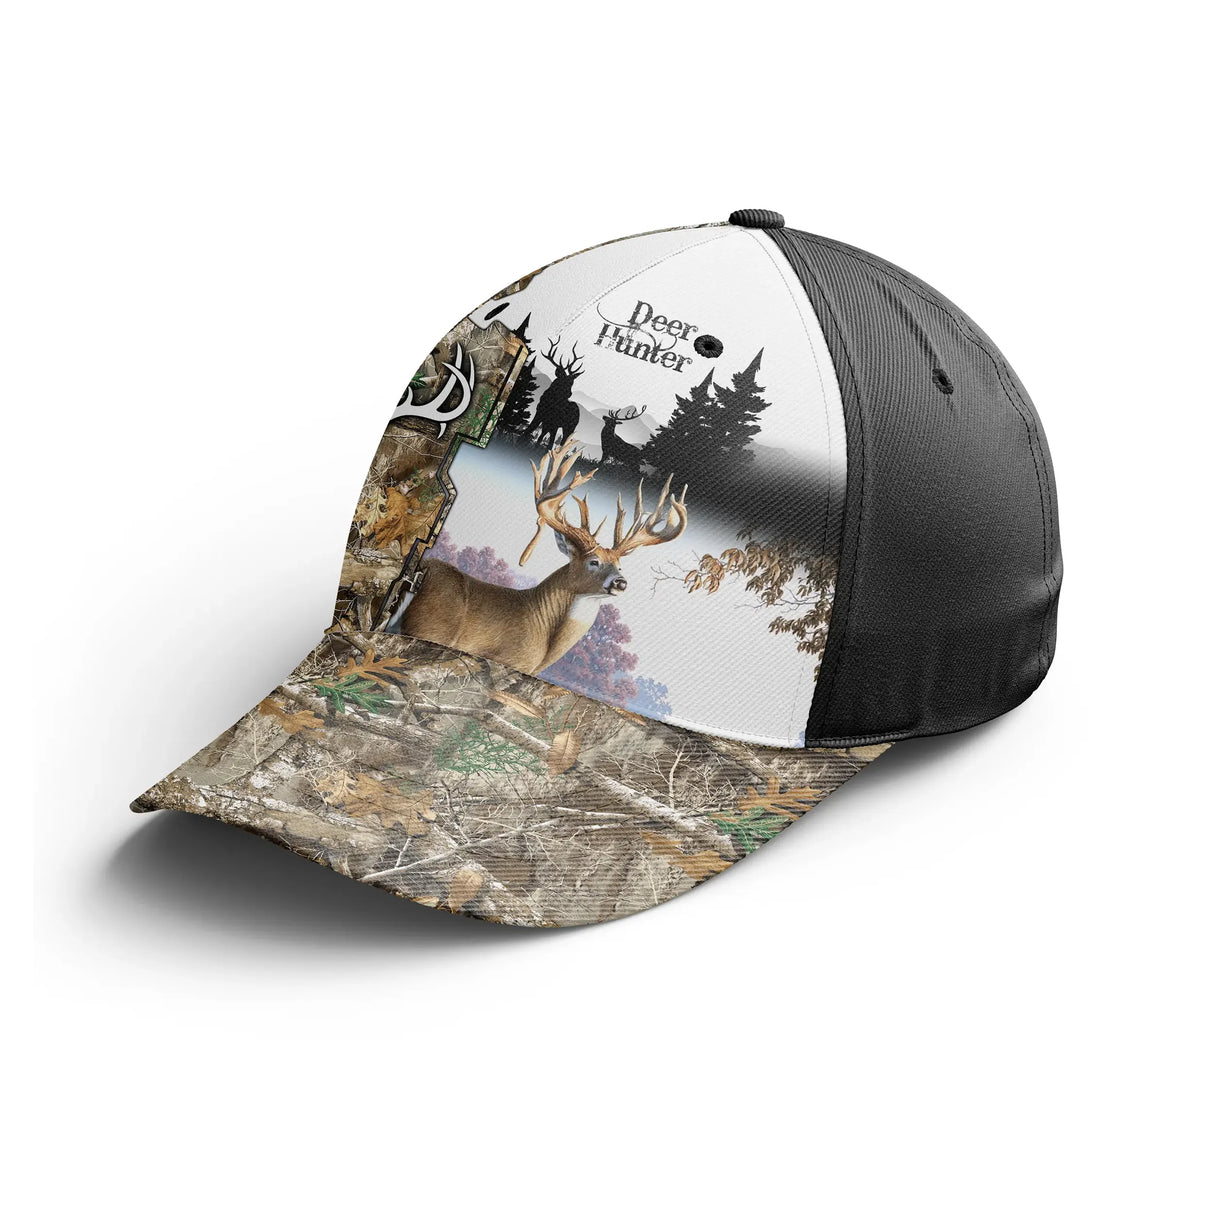 Casquette Camouflage Chasse, Idée Cadeau Chasseur, Deer Hunter, Chasse Au Cerf - CT30082221